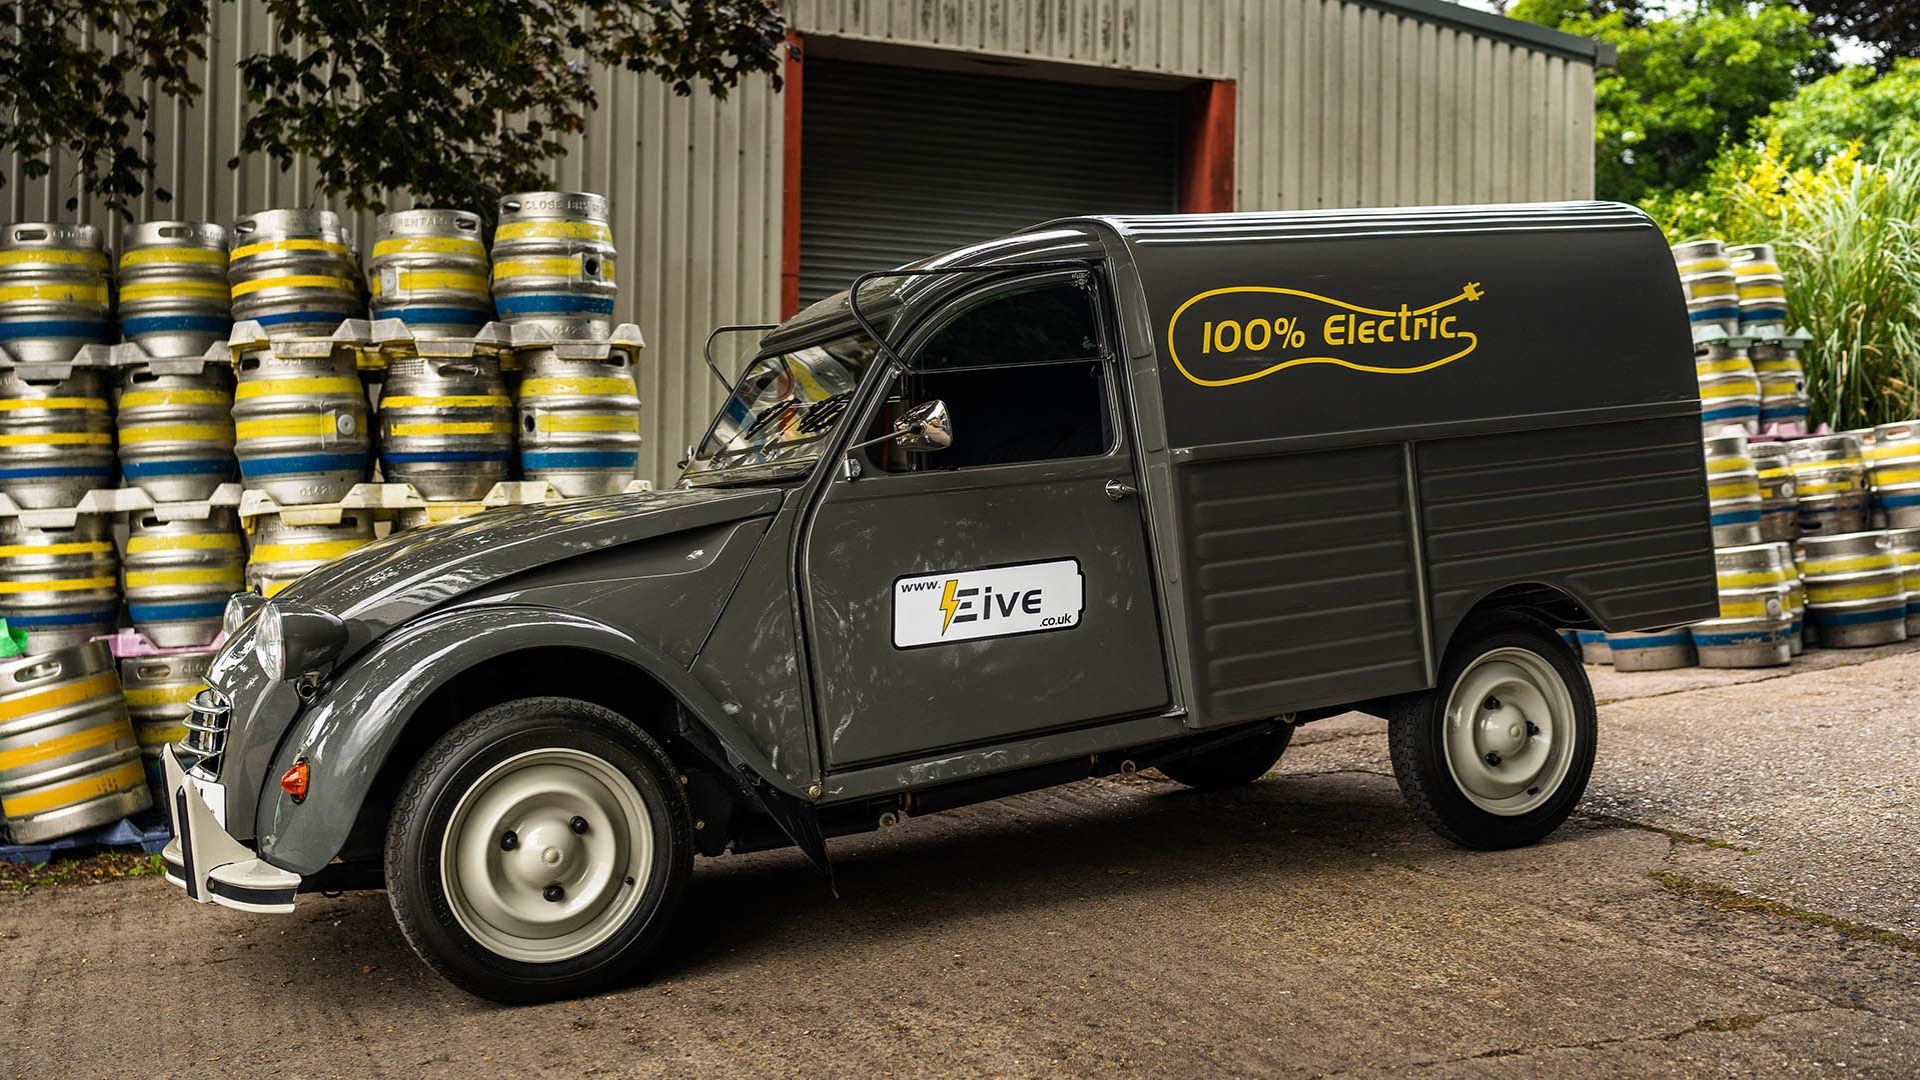 Here's Why The 2CV 'Eive' Electric Van Is A Masterclass In Lightweight  Simplicity